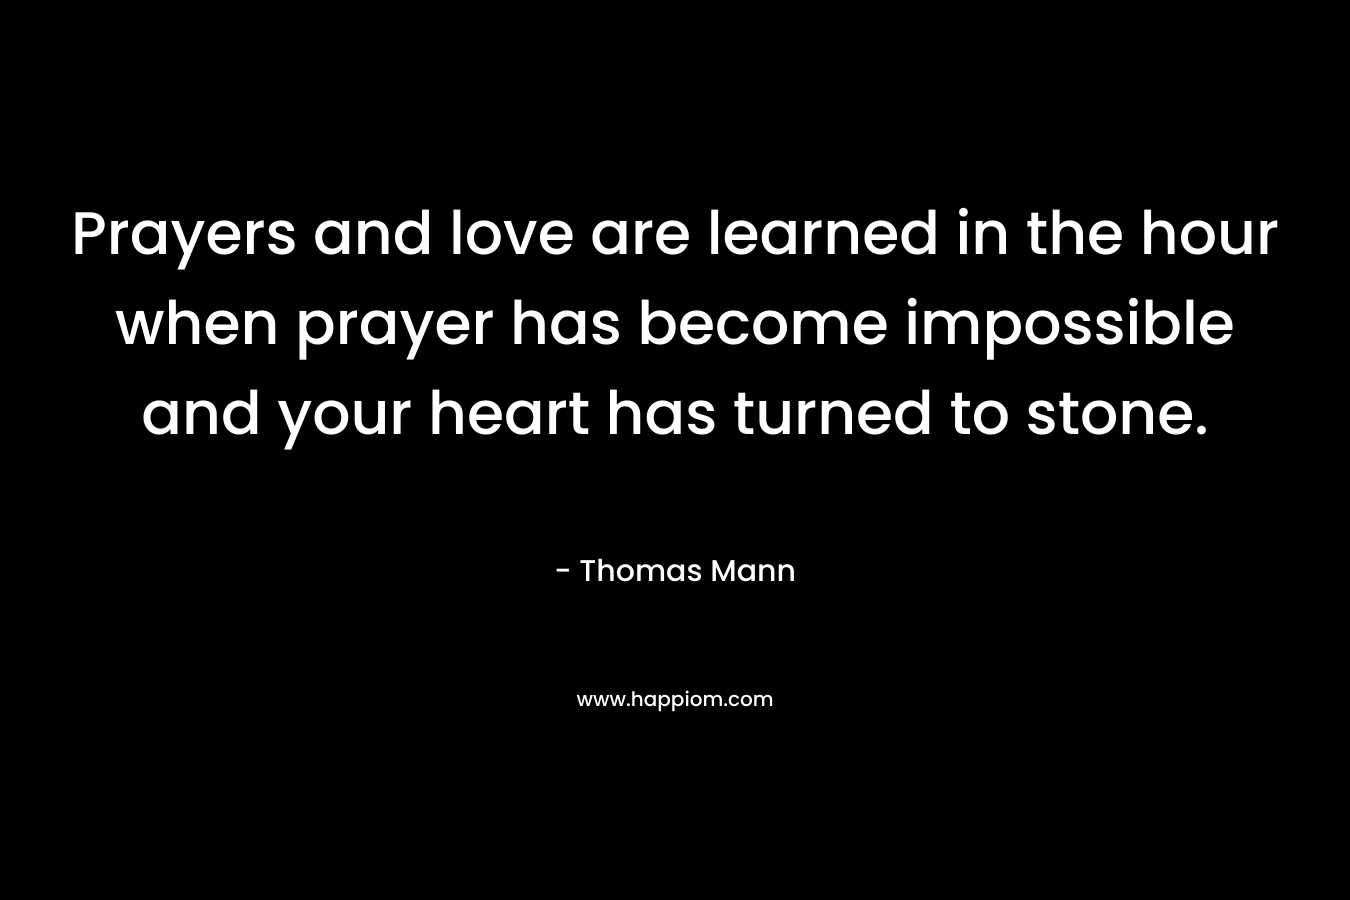 Prayers and love are learned in the hour when prayer has become impossible and your heart has turned to stone. – Thomas Mann